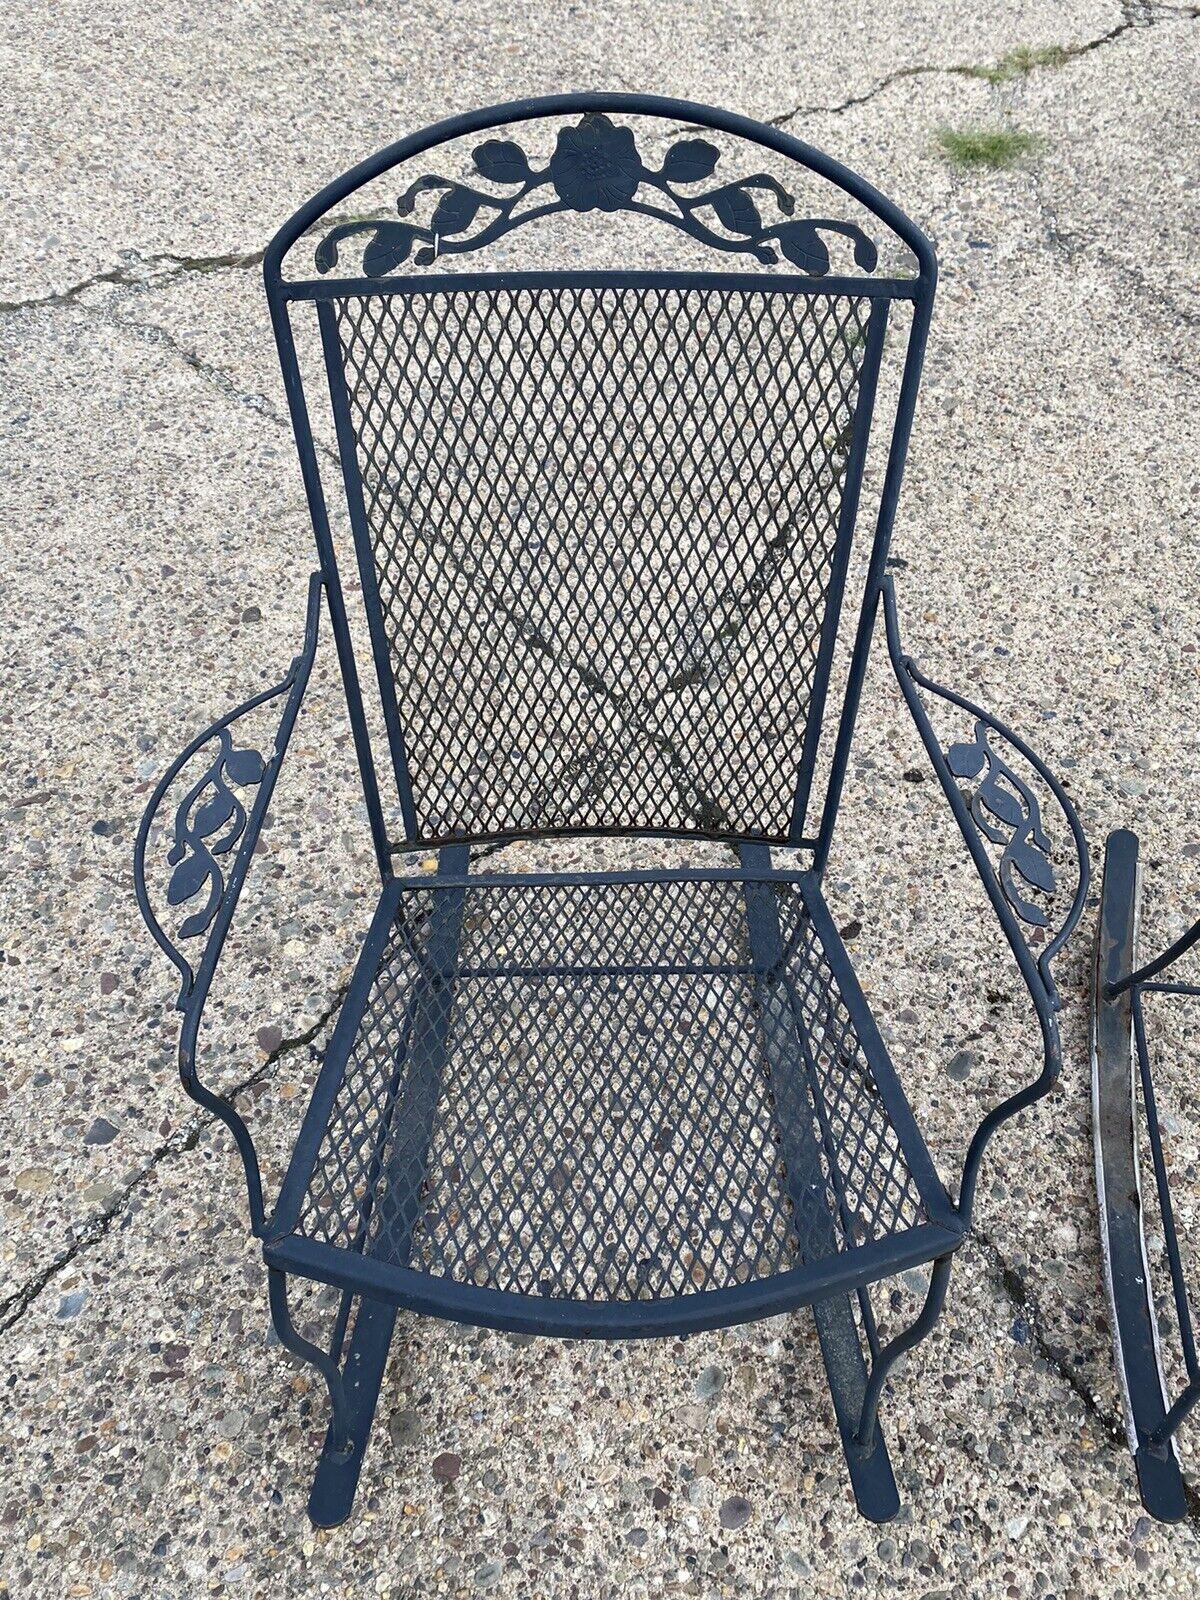 Vintage Wrought Iron Victorian Style Garden Patio Rocker Rocking Chairs - a Pair 3